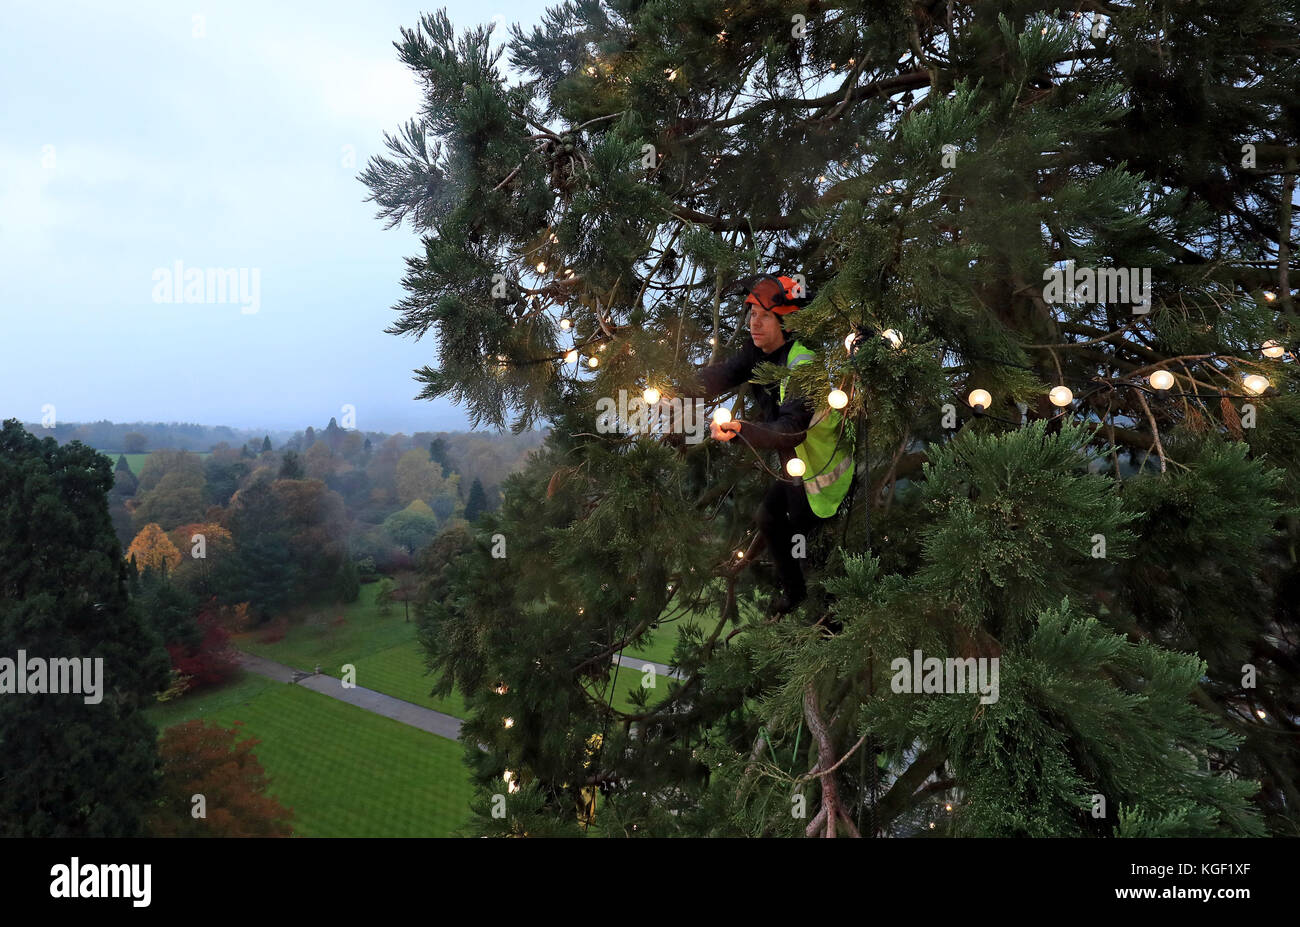 Arborist James Pumfrey checks the lights as Christmas decorations are added to Britain's tallest living Christmas tree, a 110-foot giant redwood, at Wakehurst Place in Ardingly, West Sussex. The tree, which is about 124 years old, is being adorned with 1,800 white lights. Stock Photo